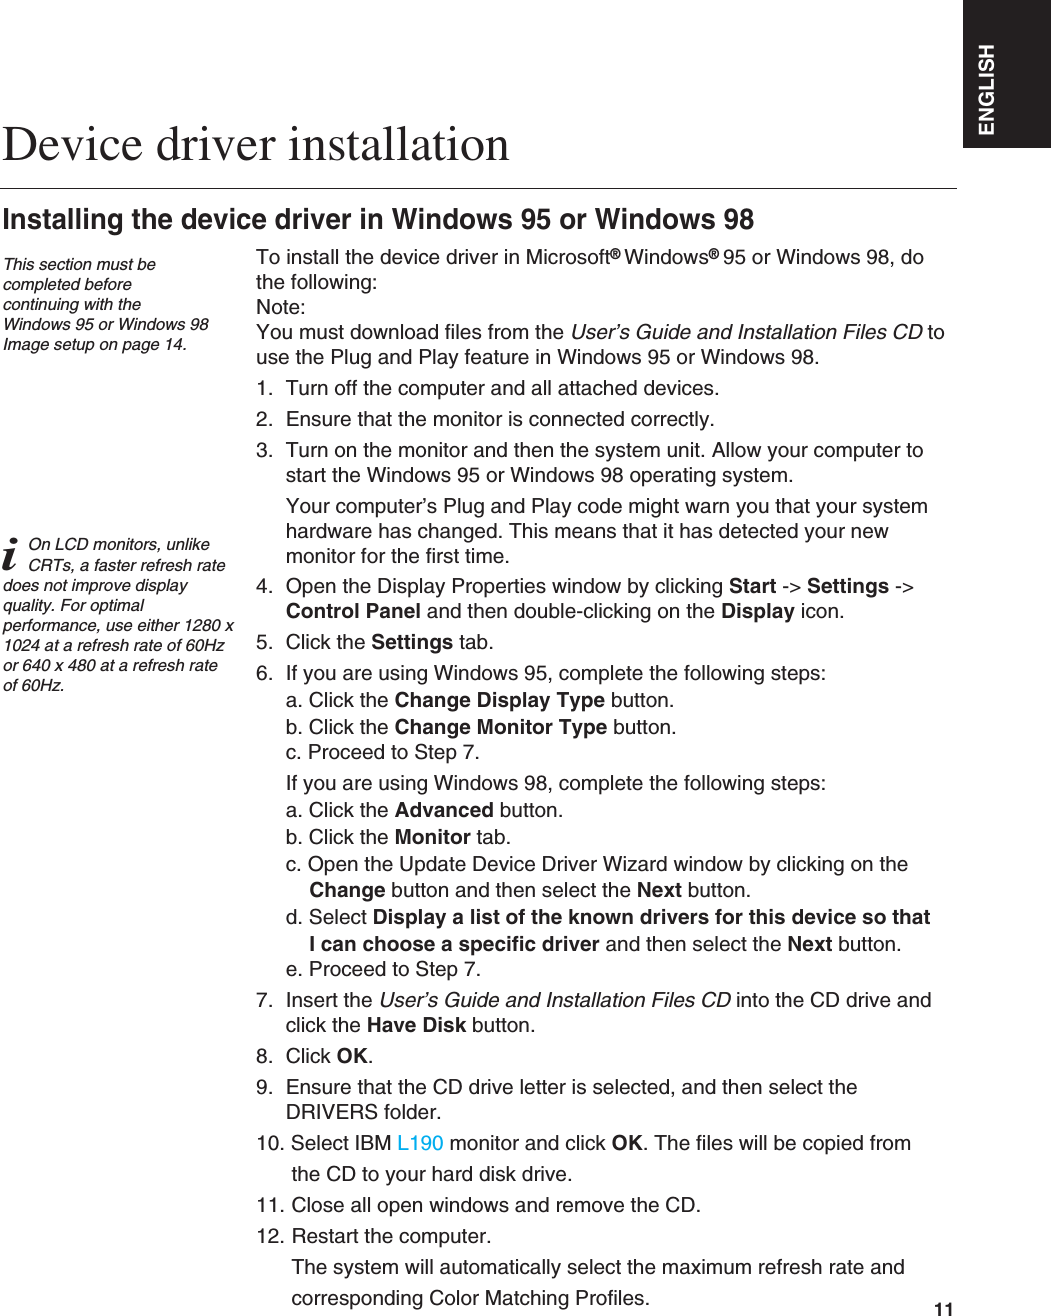 ENGLISH11To install the device driver in Microsoft®Windows®95 or Windows 98, dothe following: Note:You must download files from the User’s Guide and Installation Files CD touse the Plug and Play feature in Windows 95 or Windows 98.1. Turn off the computer and all attached devices.2. Ensure that the monitor is connected correctly.3. Turn on the monitor and then the system unit. Allow your computer tostart the Windows 95 or Windows 98 operating system.Your computer’s Plug and Play code might warn you that your systemhardware has changed. This means that it has detected your newmonitor for the first time.4. Open the Display Properties window by clicking Start -&gt; Settings -&gt;Control Panel and then double-clicking on the Display icon.5. Click the Settings tab.6. If you are using Windows 95, complete the following steps: a. Click the Change Display Type button.b. Click the Change Monitor Type button.c. Proceed to Step 7.If you are using Windows 98, complete the following steps: a. Click the Advanced button.b. Click the Monitor tab.c. Open the Update Device Driver Wizard window by clicking on theChange button and then select the Next button.d. Select Display a list of the known drivers for this device so that I can choose a specific driver and then select the Next button. e. Proceed to Step 7.7. Insert the User’s Guide and Installation Files CD into the CD drive andclick the Have Disk button.8. Click OK.9. Ensure that the CD drive letter is selected, and then select theDRIVERS folder.10. Select IBM L190 monitor and click OK. The files will be copied from the CD to your hard disk drive.11. Close all open windows and remove the CD.12. Restart the computer.The system will automatically select the maximum refresh rate and corresponding Color Matching Profiles. Device driver installationInstalling the device driver in Windows 95 or Windows 98This section must becompleted before continuing with the Windows 95 or Windows 98Image setup on page 14.iOn LCD monitors, unlikeCRTs, a faster refresh ratedoes not improve displayquality. For optimalperformance, use either 1280 x1024 at a refresh rate of 60Hzor 640 x 480 at a refresh rateof 60Hz.